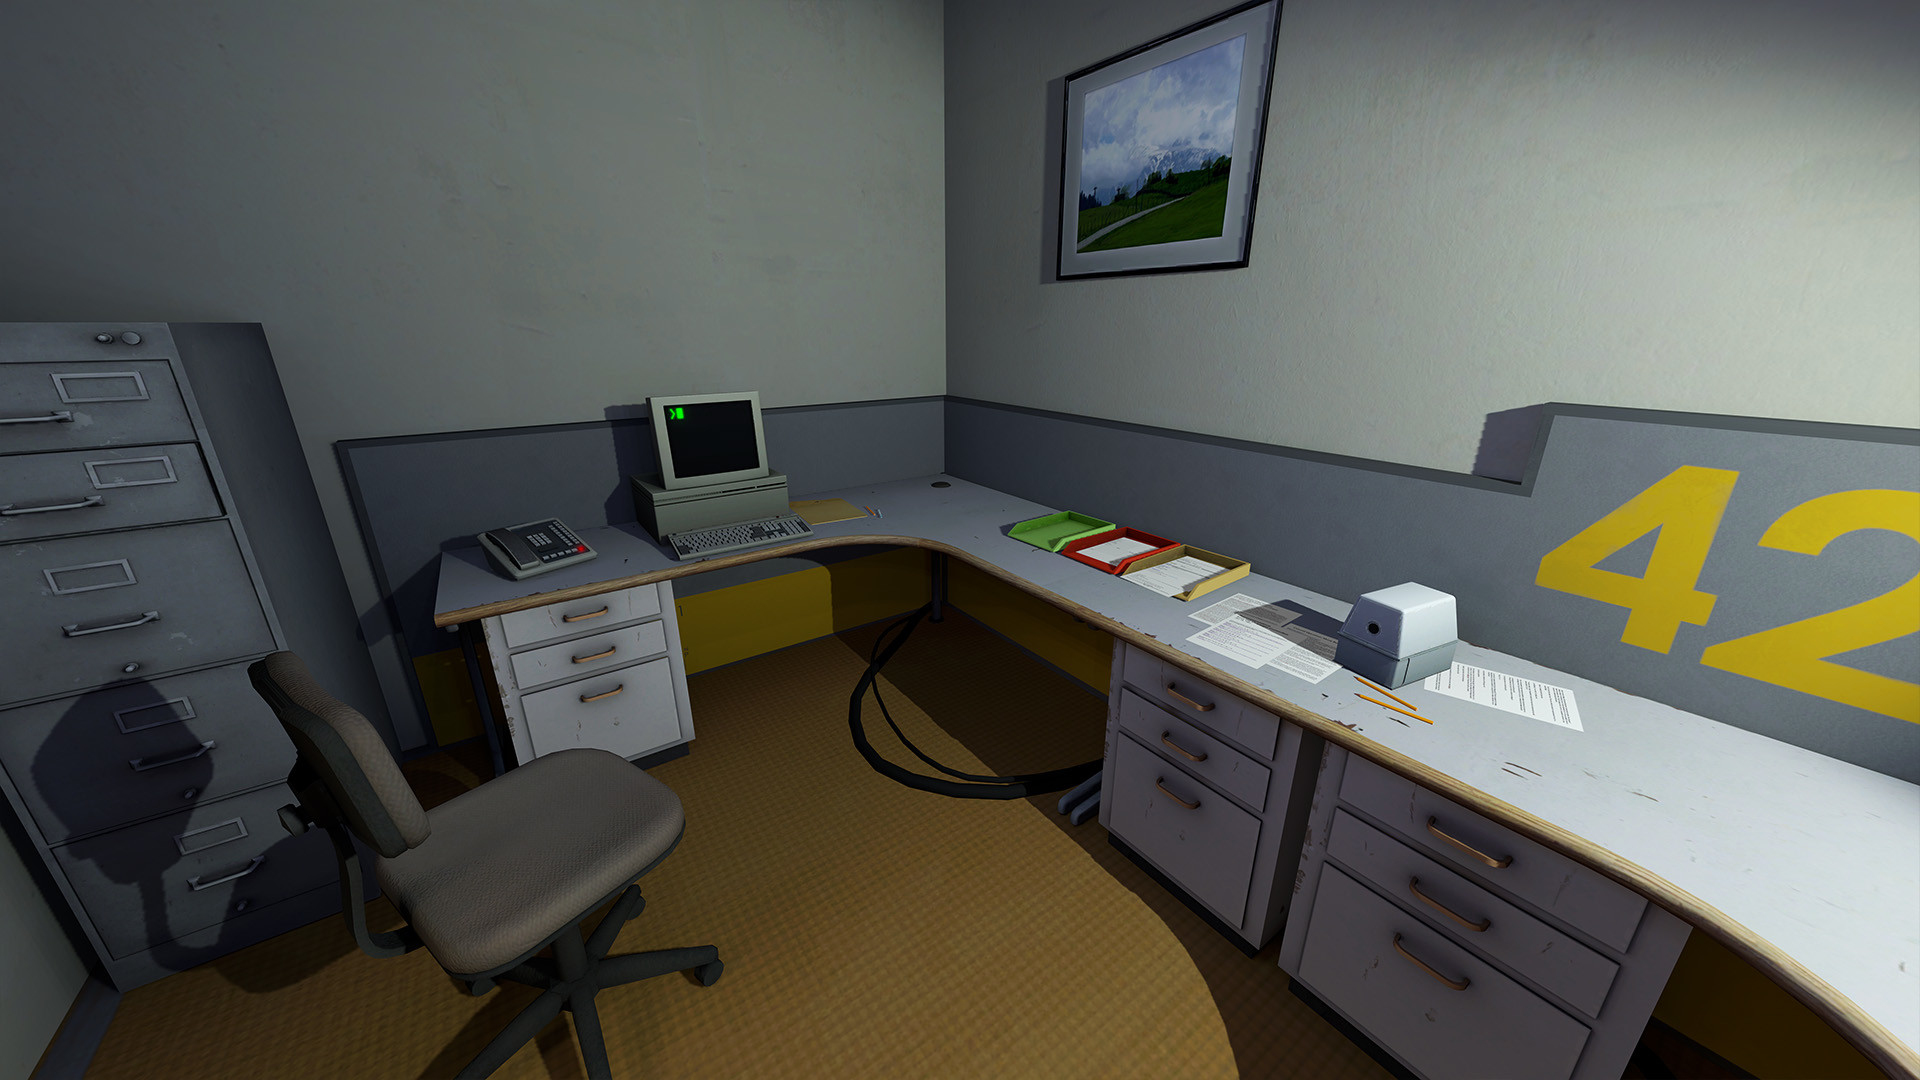  The Stanley Parable: Ultra Deluxe will be out early 2022, for real this time 